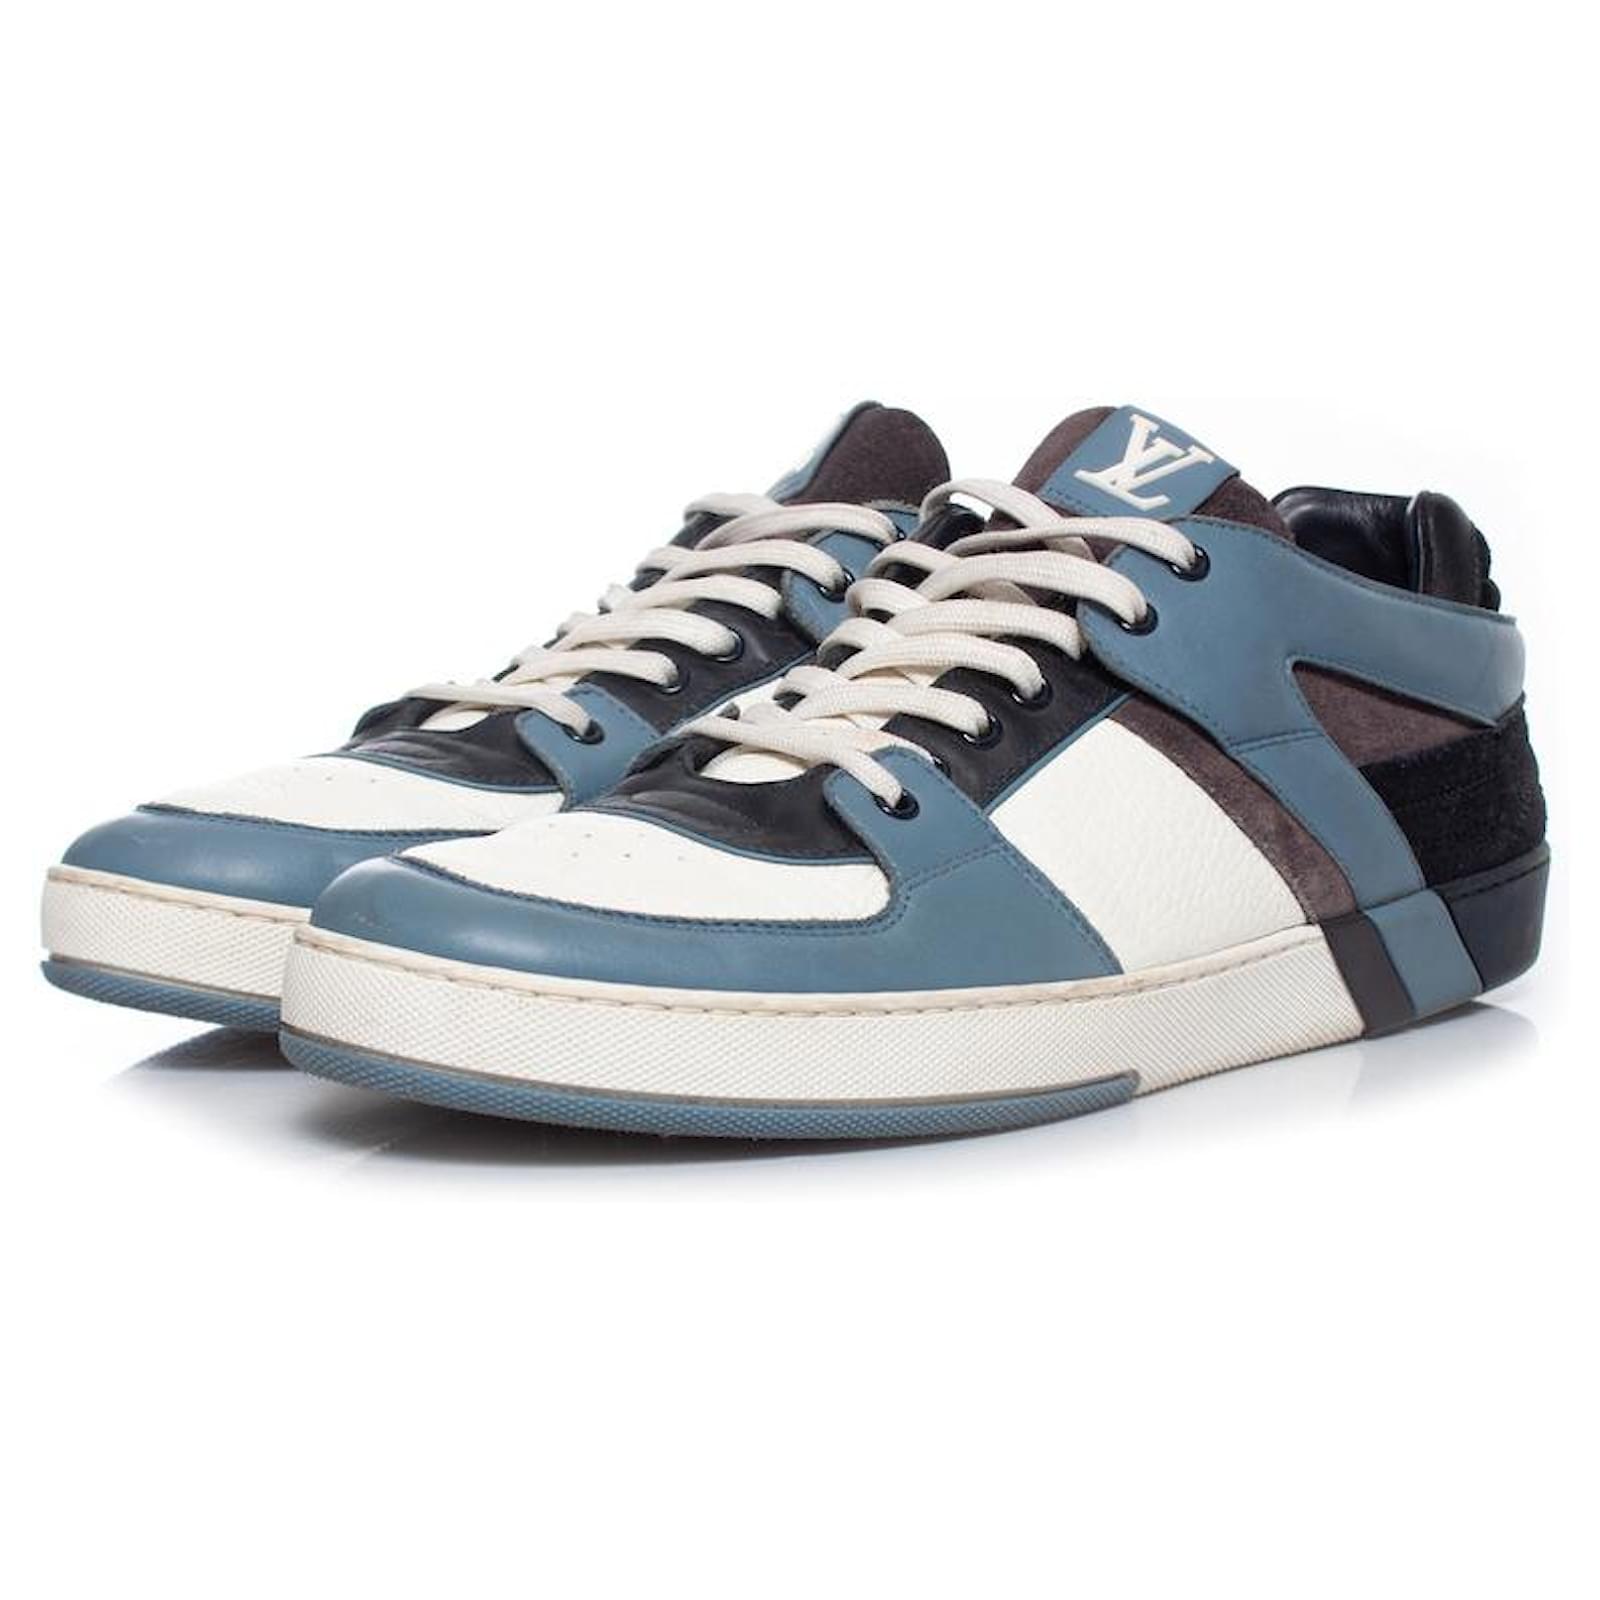 Louis Vuitton, Shoes, Blue Louis Vuitton Navy And White Leather Sneakers